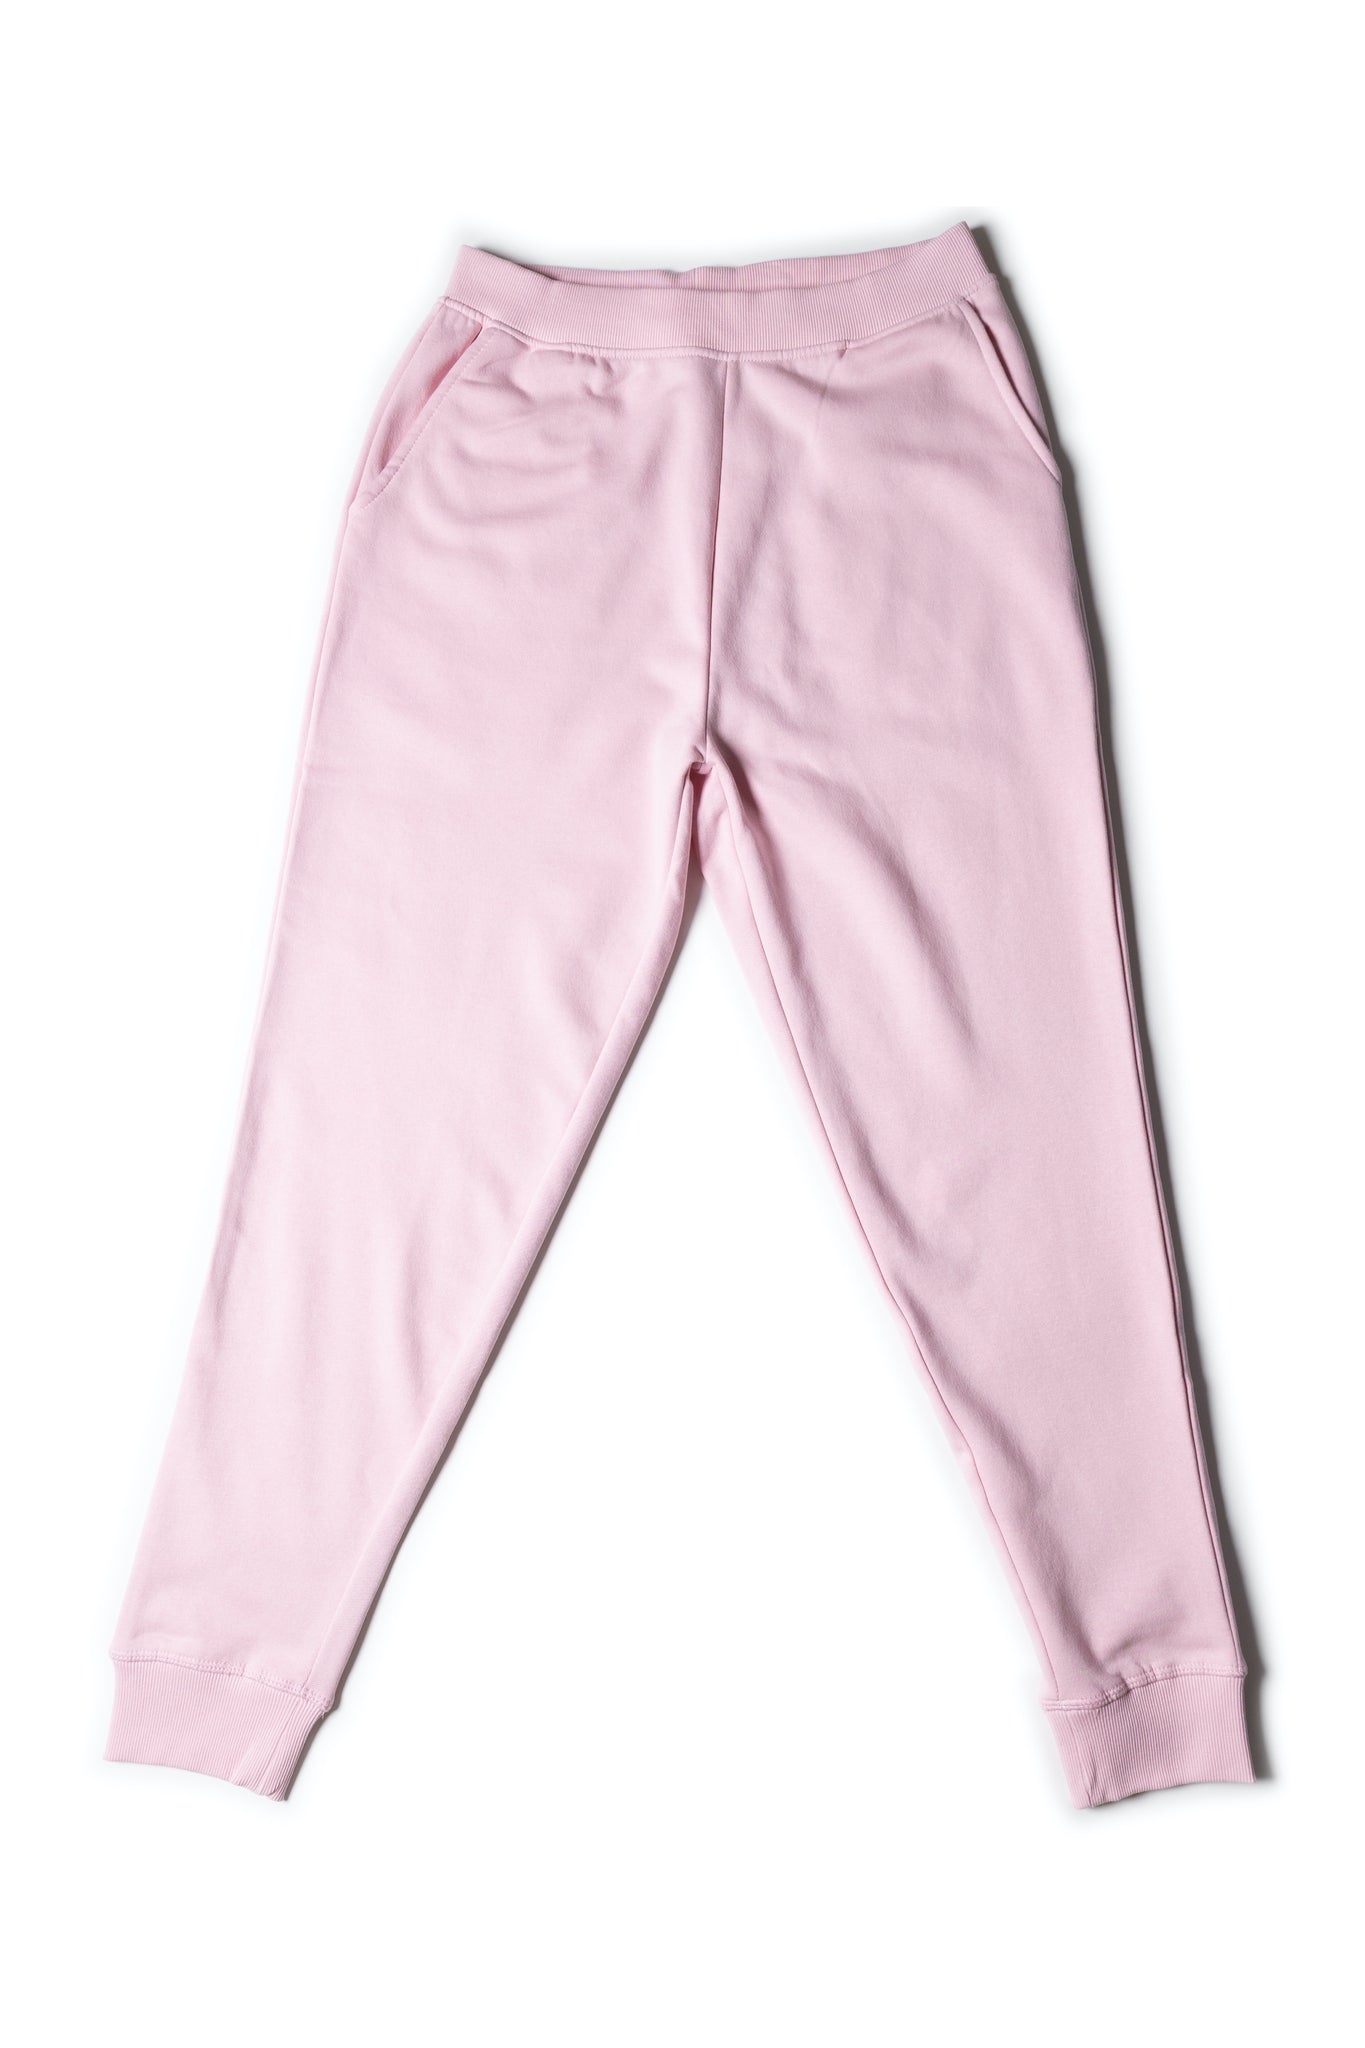 HERO-5020R Unisex Joggers - Pink (Relaxed Fit)